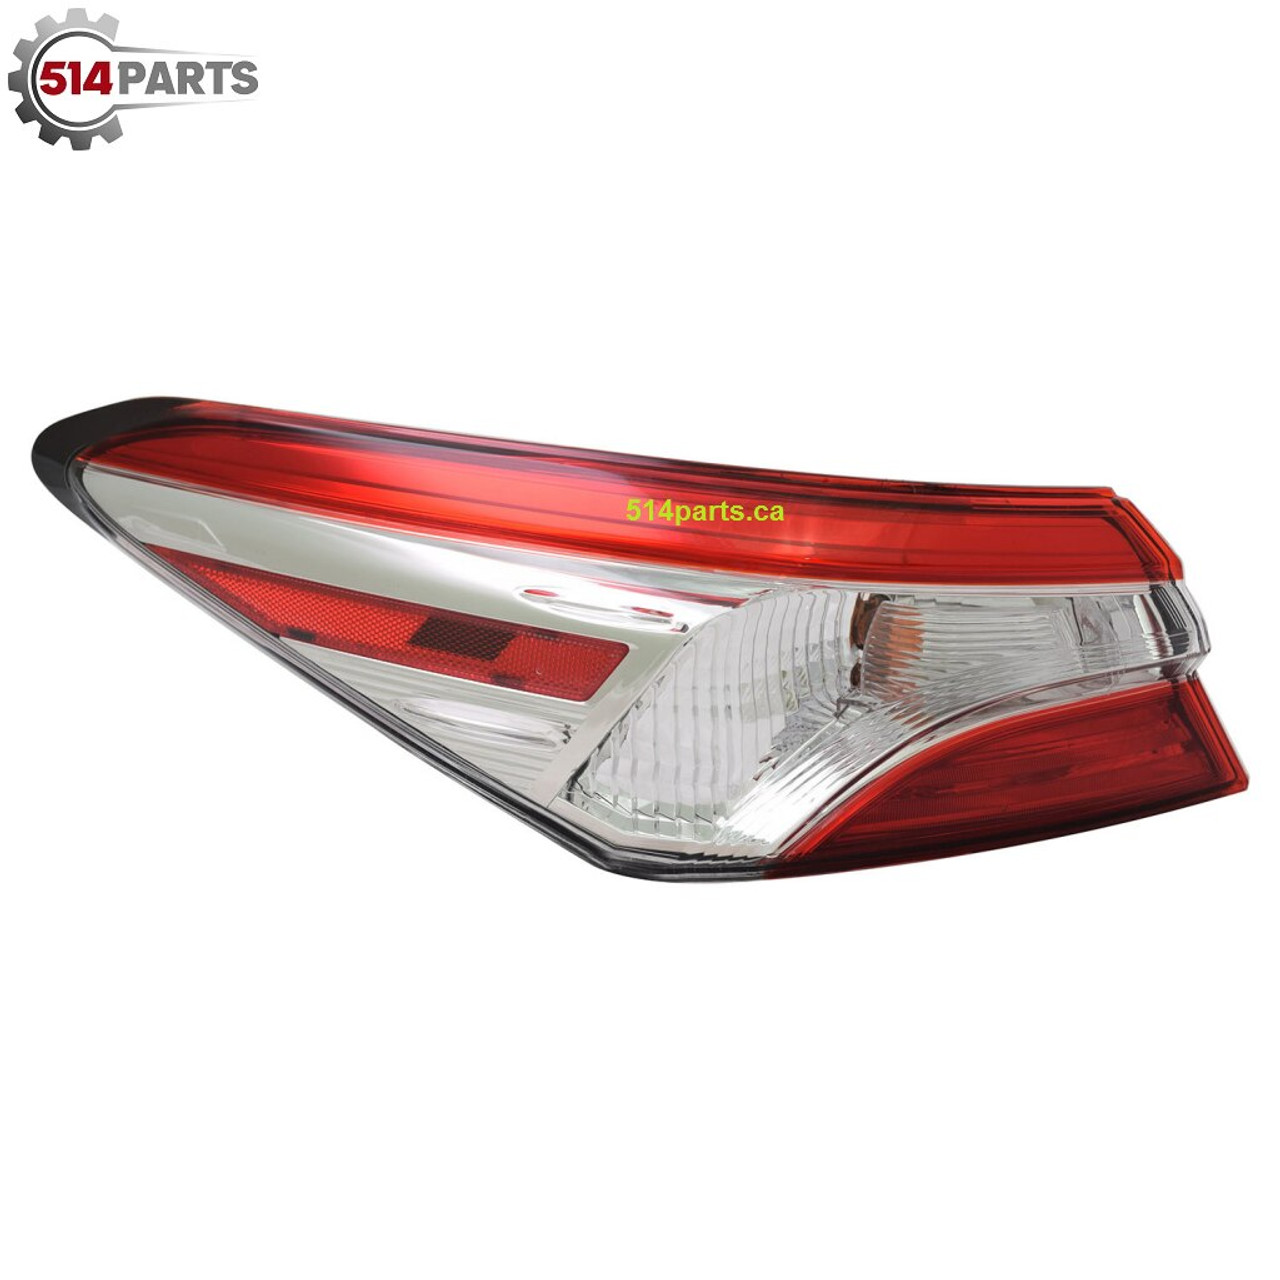 2018 - 2020 TOYOTA CAMRY and CAMRY HYBRID L/LE USA BUILT Models TAIL LIGHTS Without SMOKED TINT - PHARES ARRIERE SANS TEINTURE FUMEE